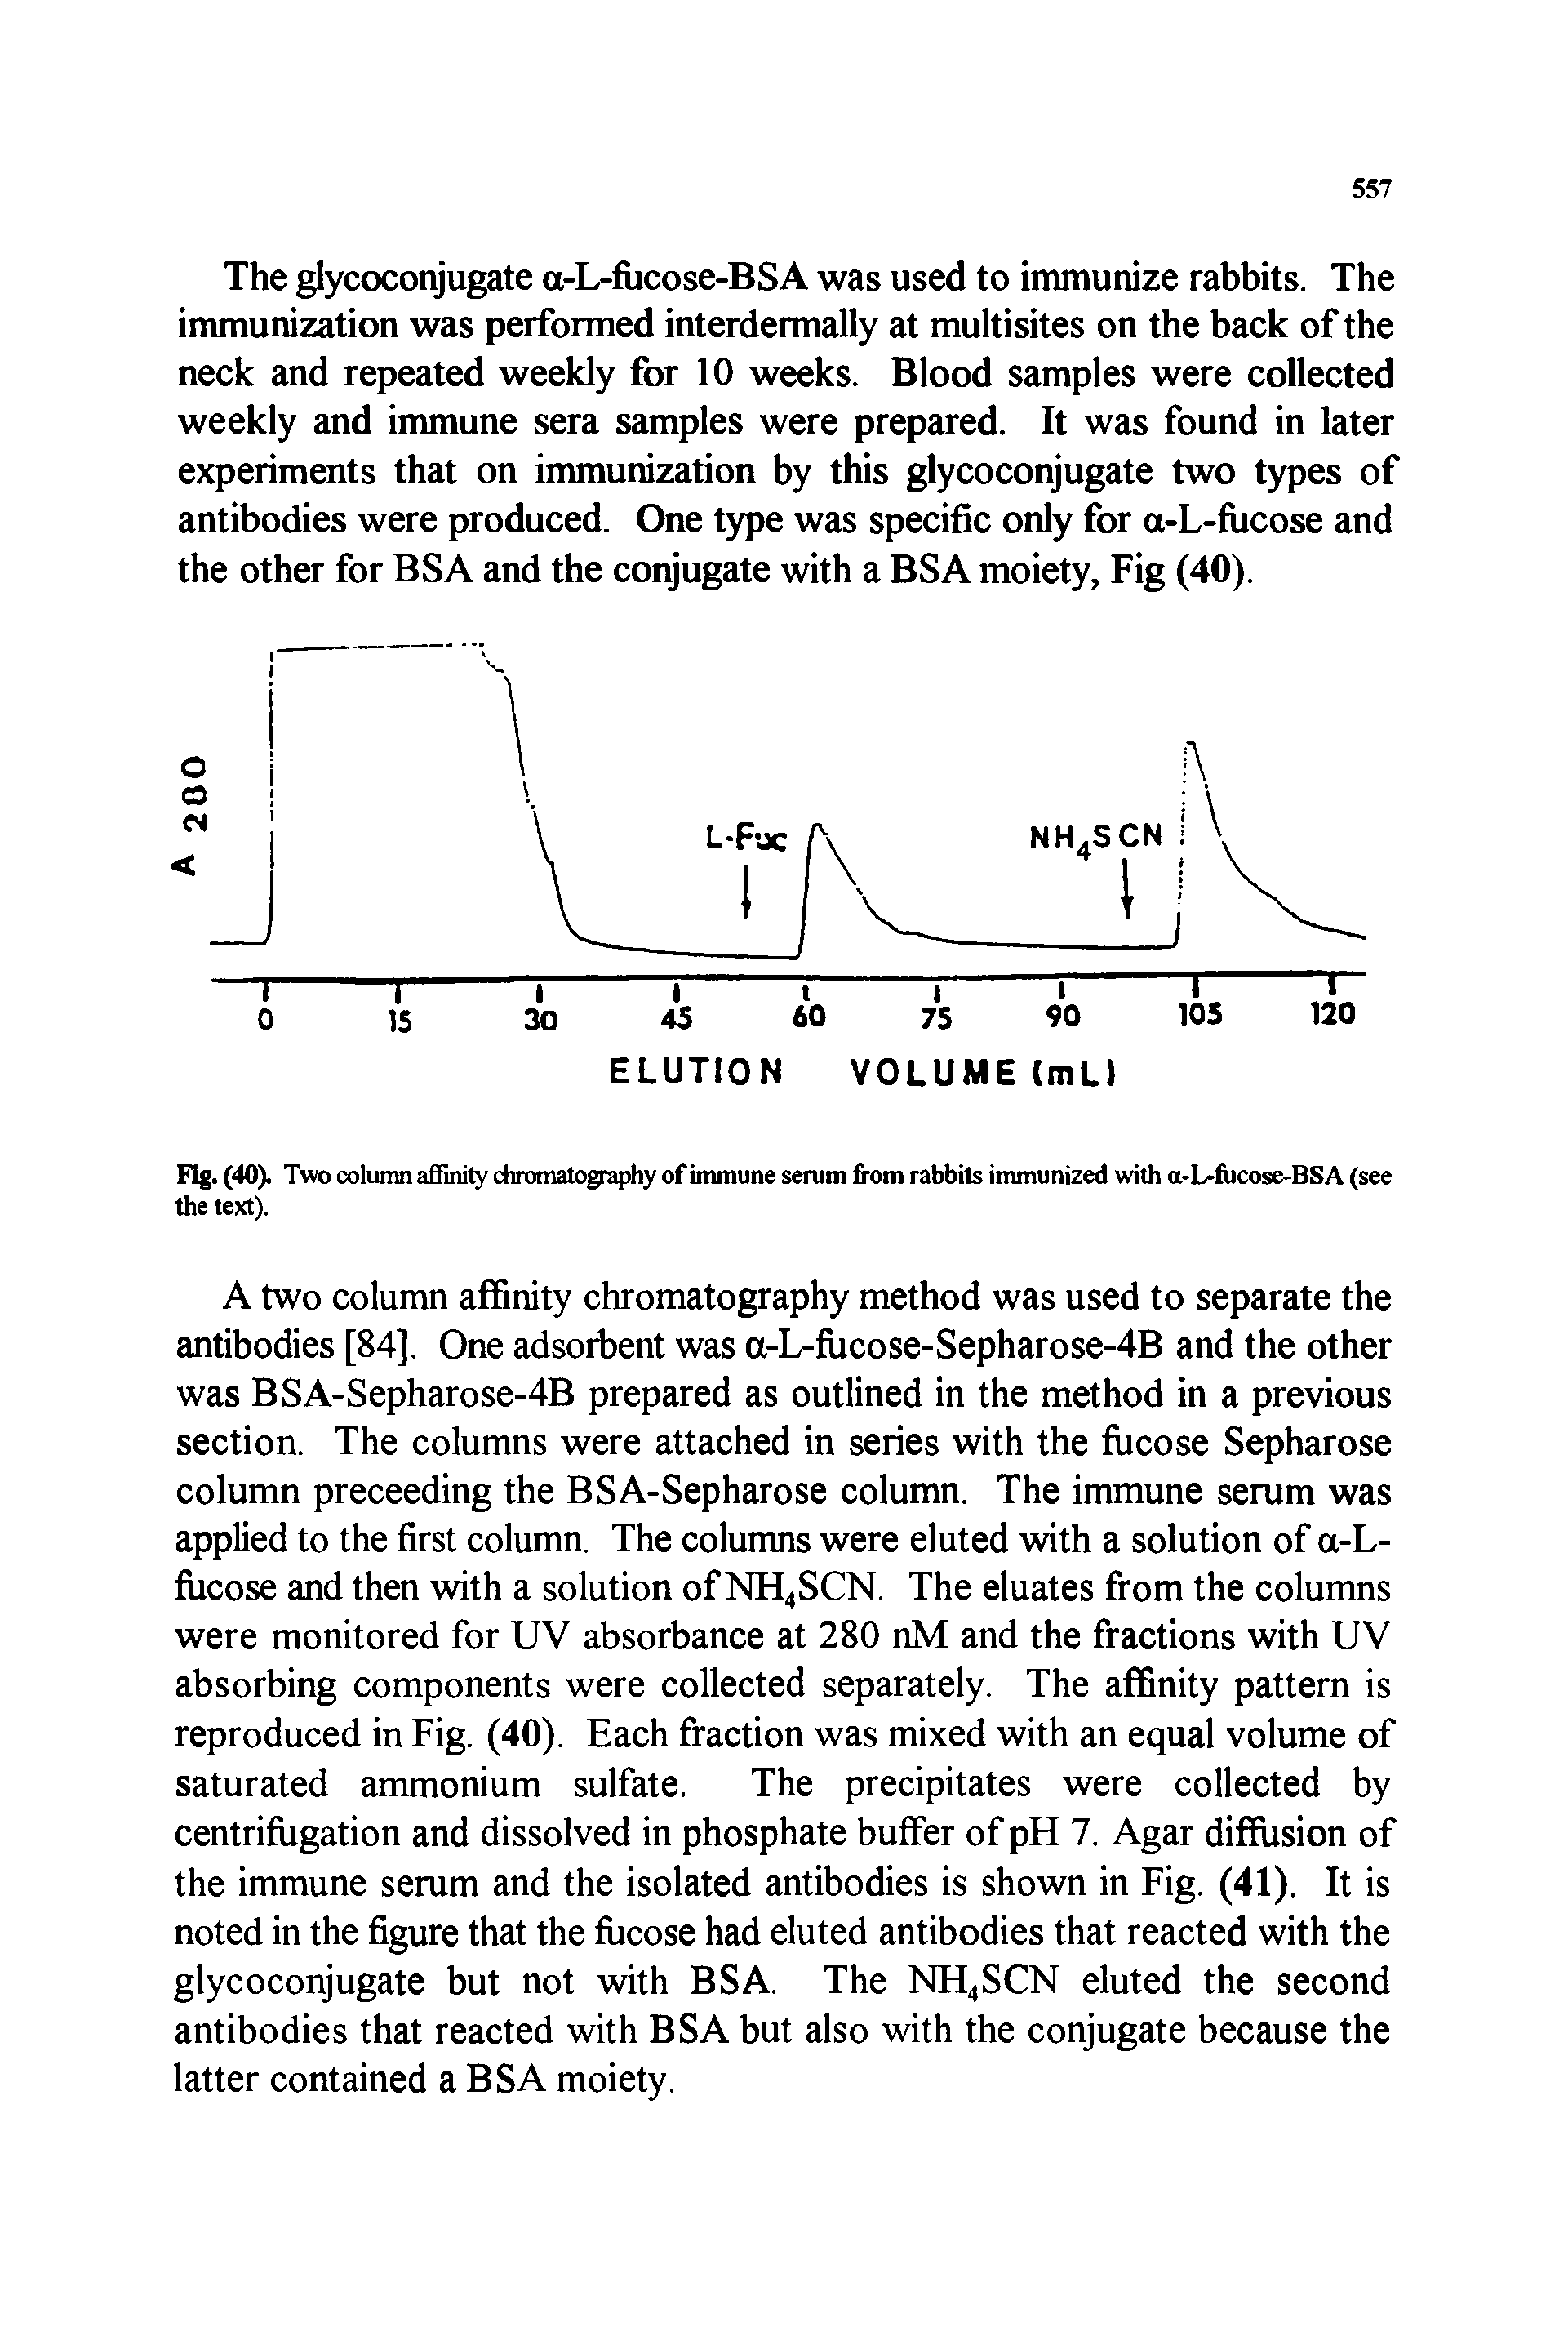 Fig. (40). Two column affinity chromatography of immune serum from rabbits immunized with a-L-fucose-BSA (see the text).